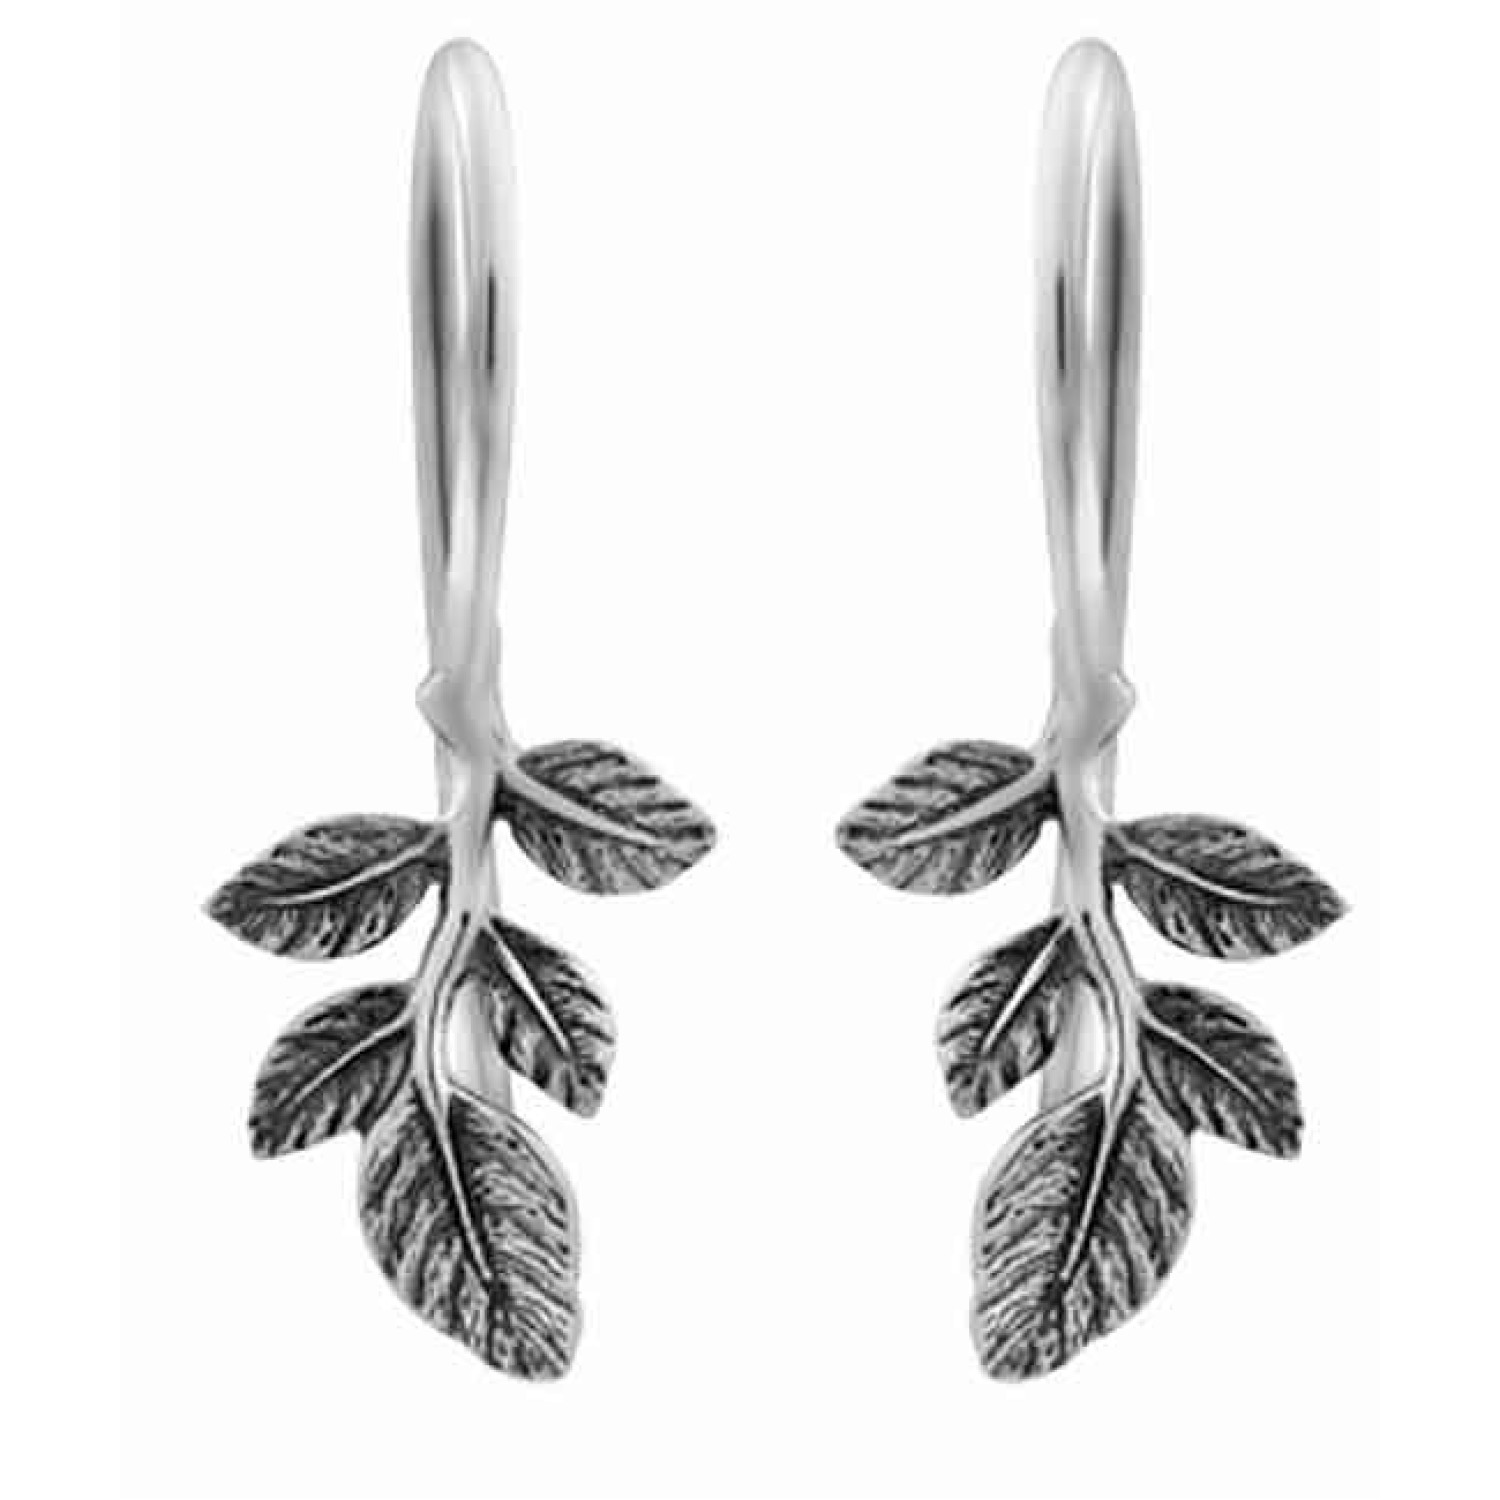 2E61002 Evolve NZ Wild Vine Drop Earrings. These stunning Wild Vine Drop earrings were especially created in sterling silver for those people who radiate strength, vitality and have an unwavering spirit when faced with adversity and challenge.  Available 